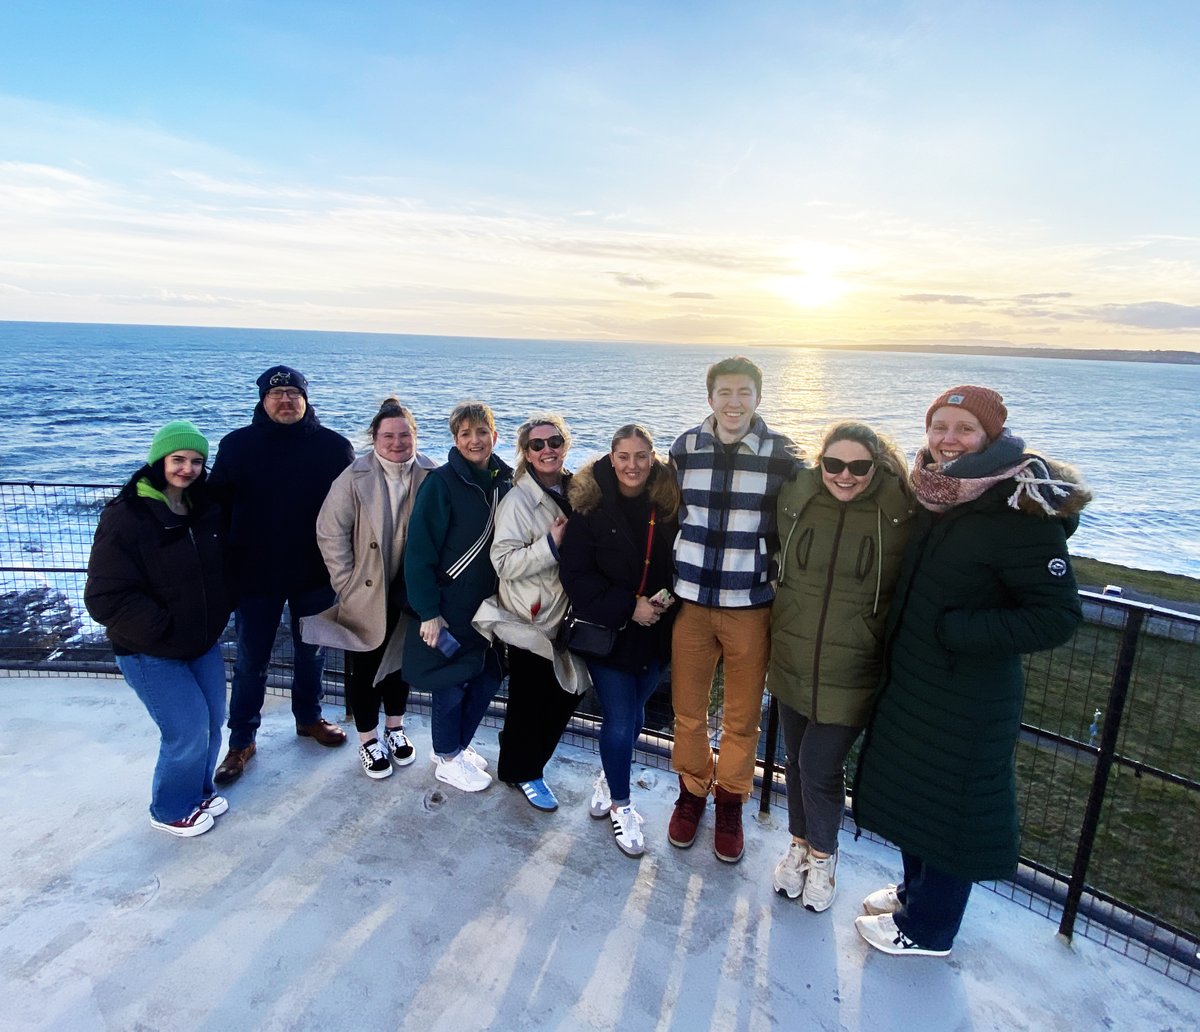 Some truly spectacular scenes were enjoyed during our social club's recent tour of Hook Lighthouse in Wexford! #sunnysoutheast #team #springtime